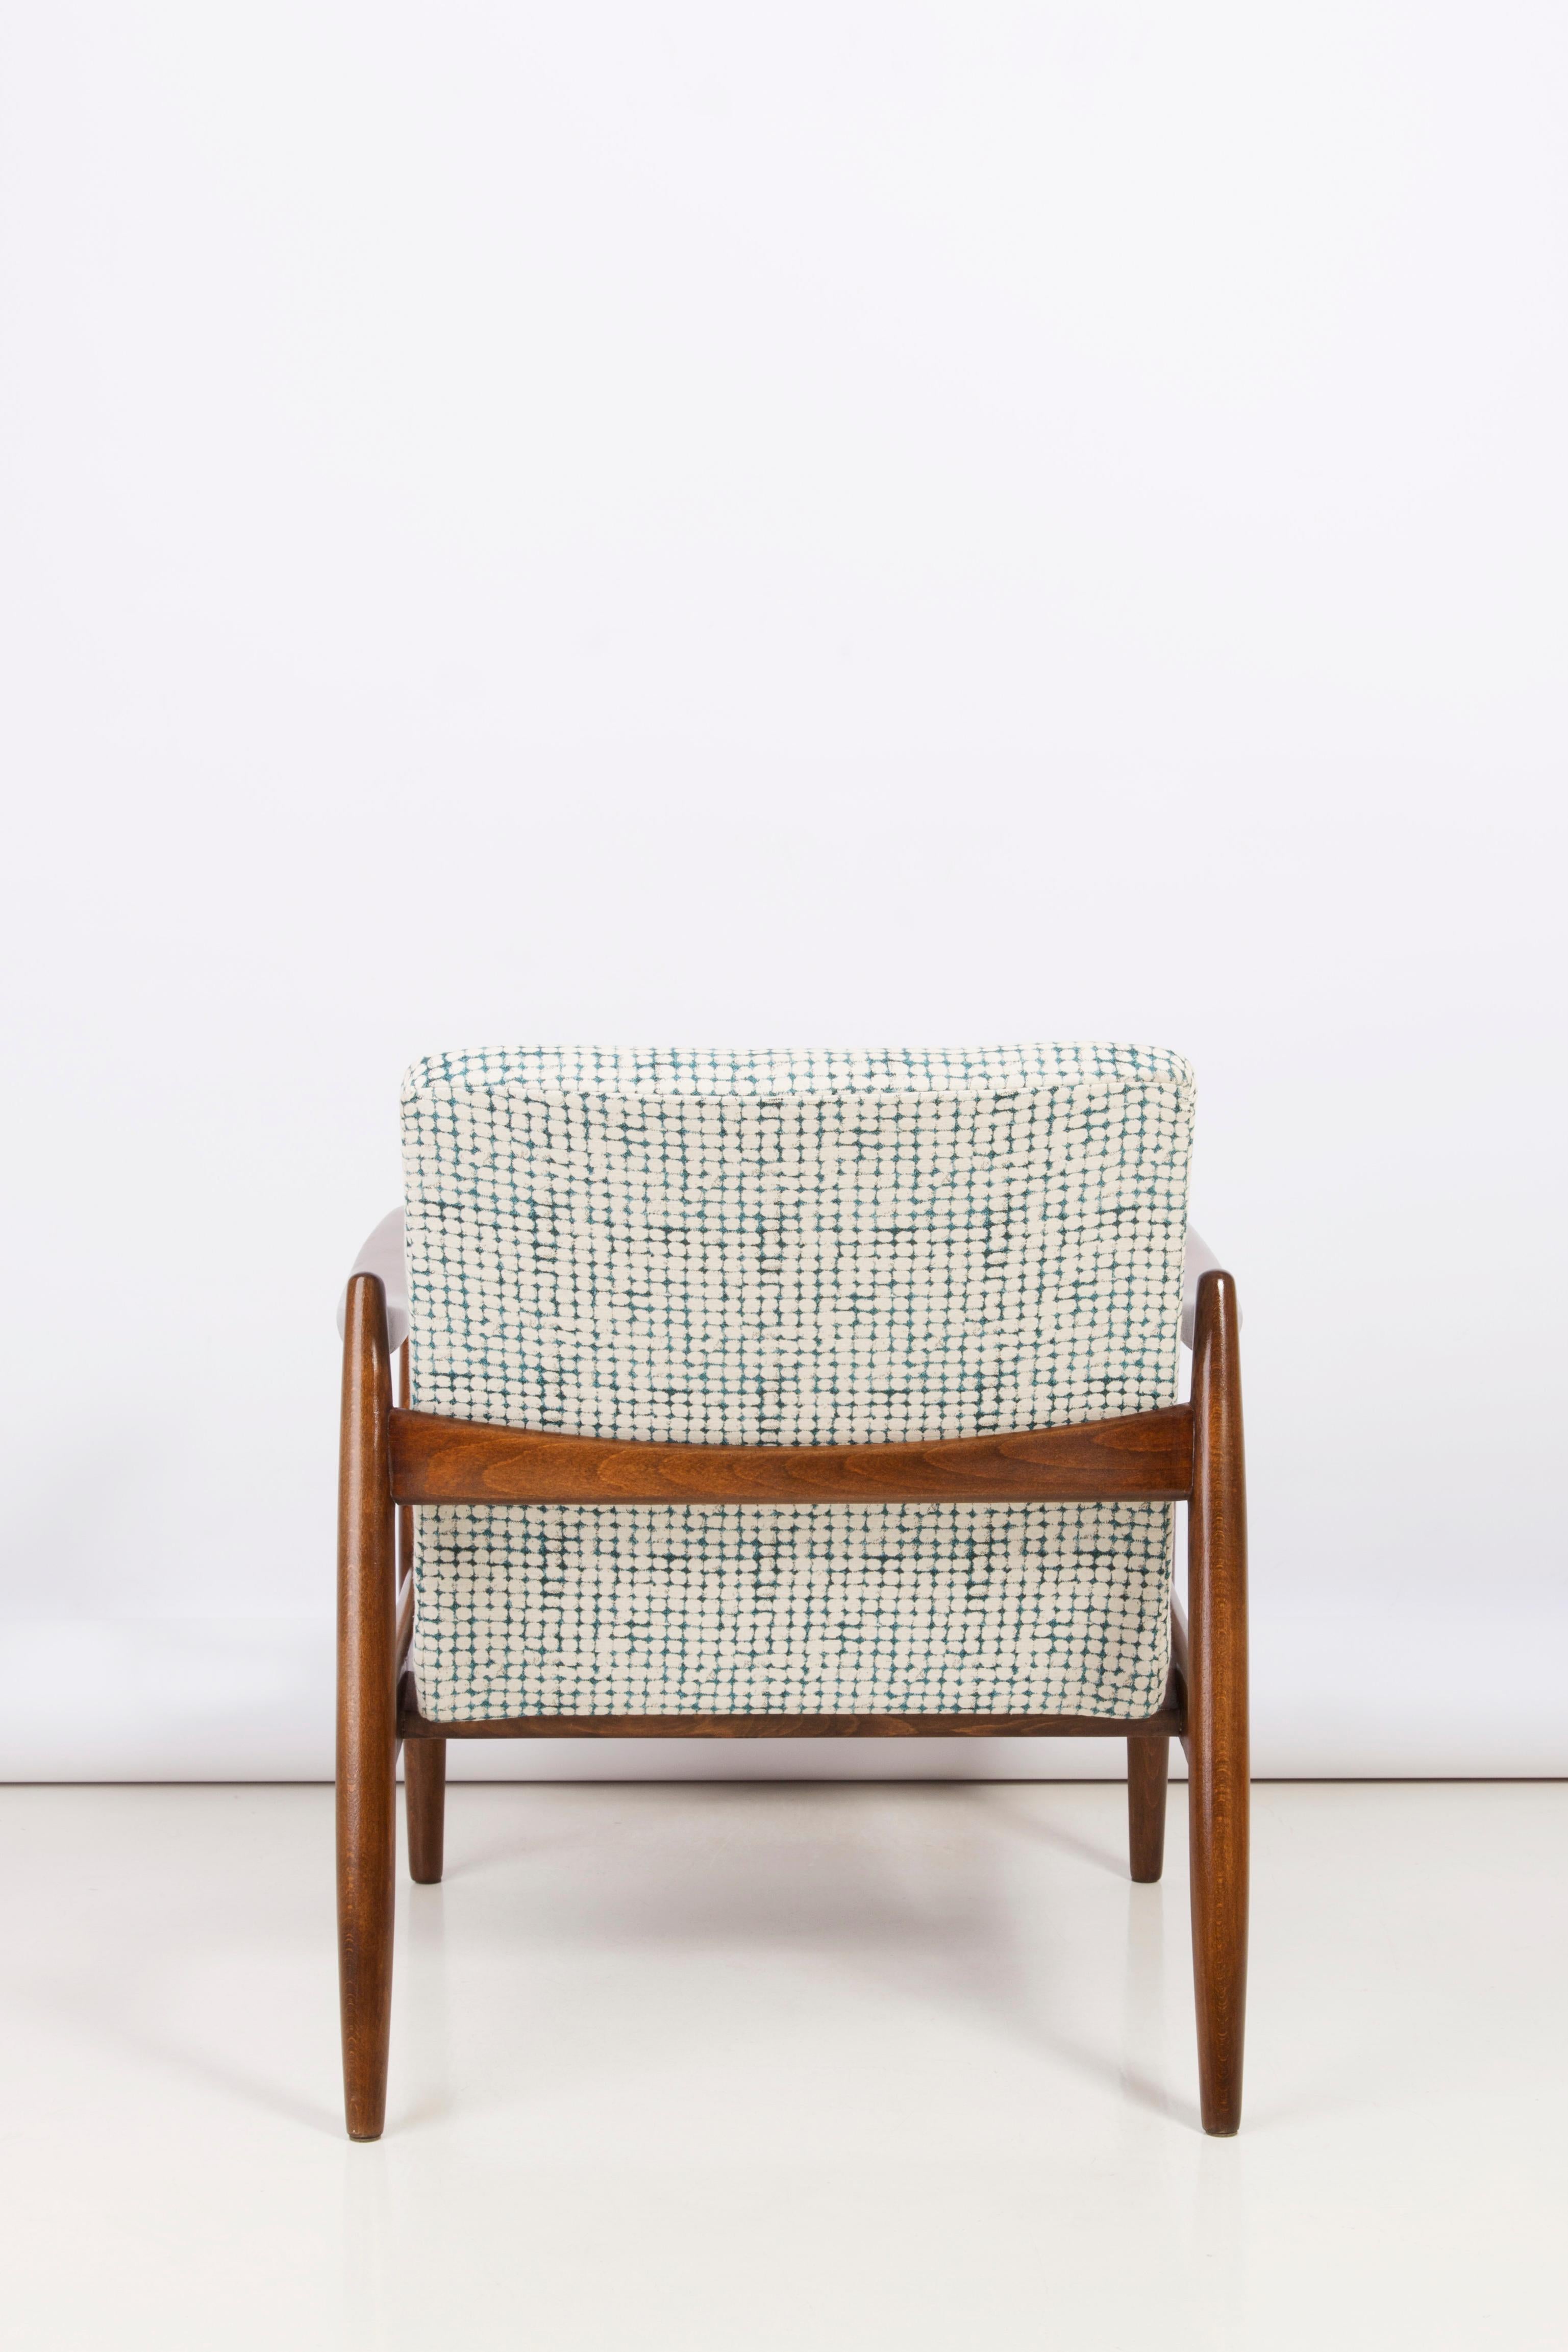 White and Aqua Vintage Armchair and Stool, Edmund Homa, 1960s For Sale 3